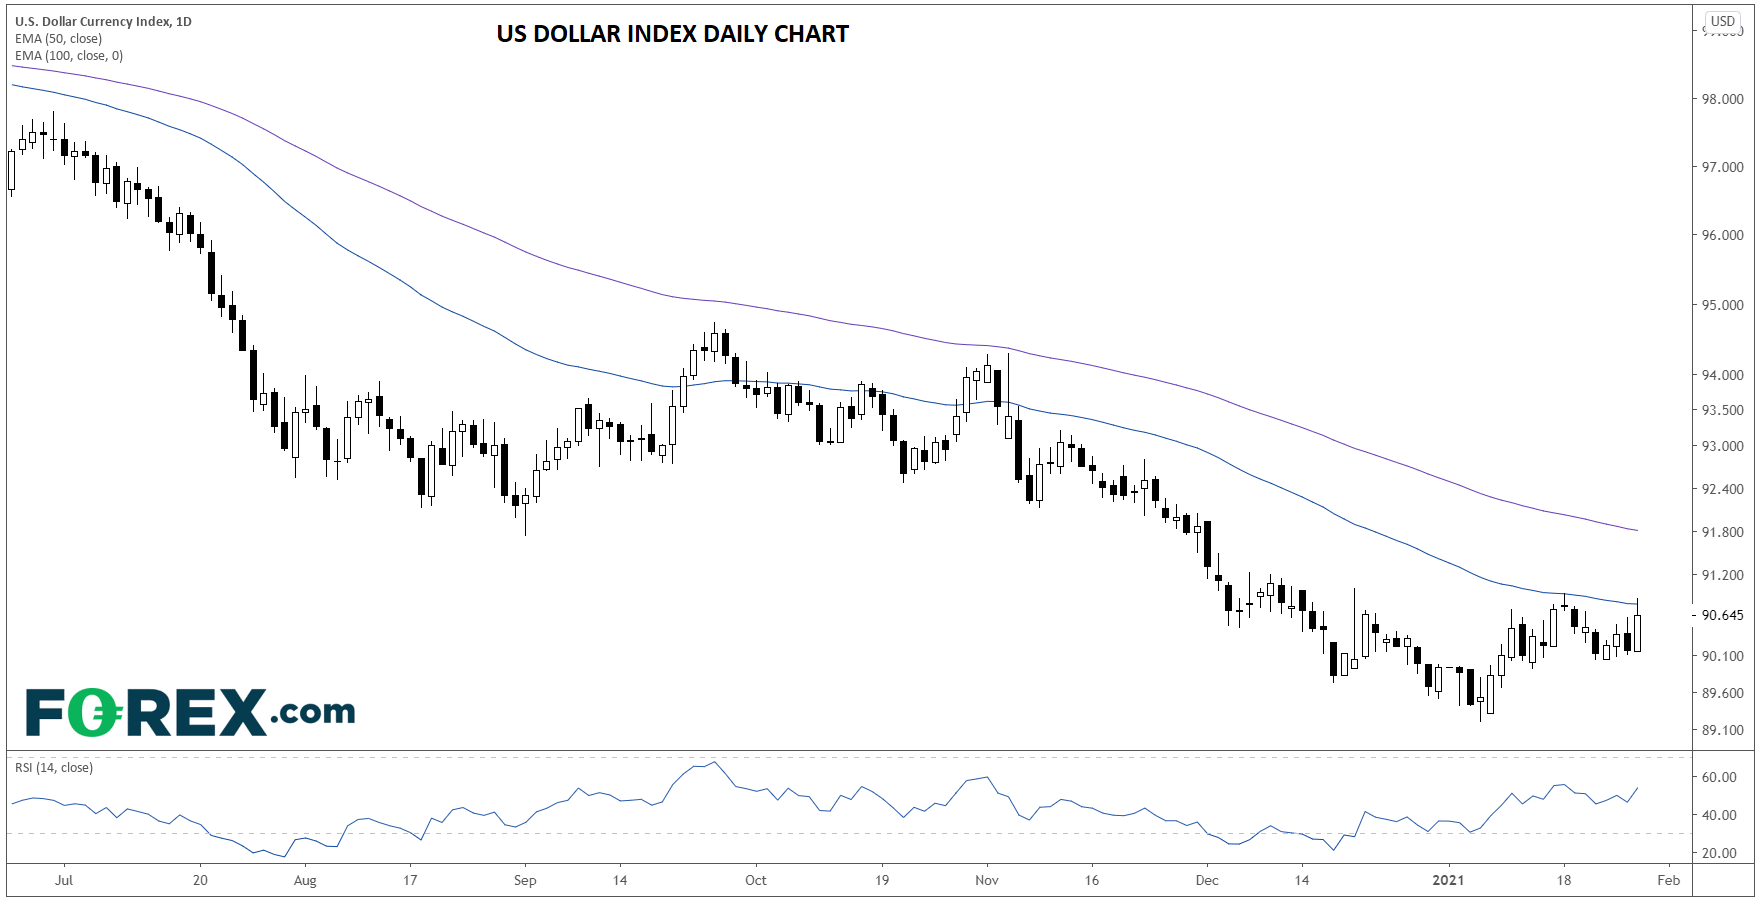 US Dollar Currency Index Daily Chart